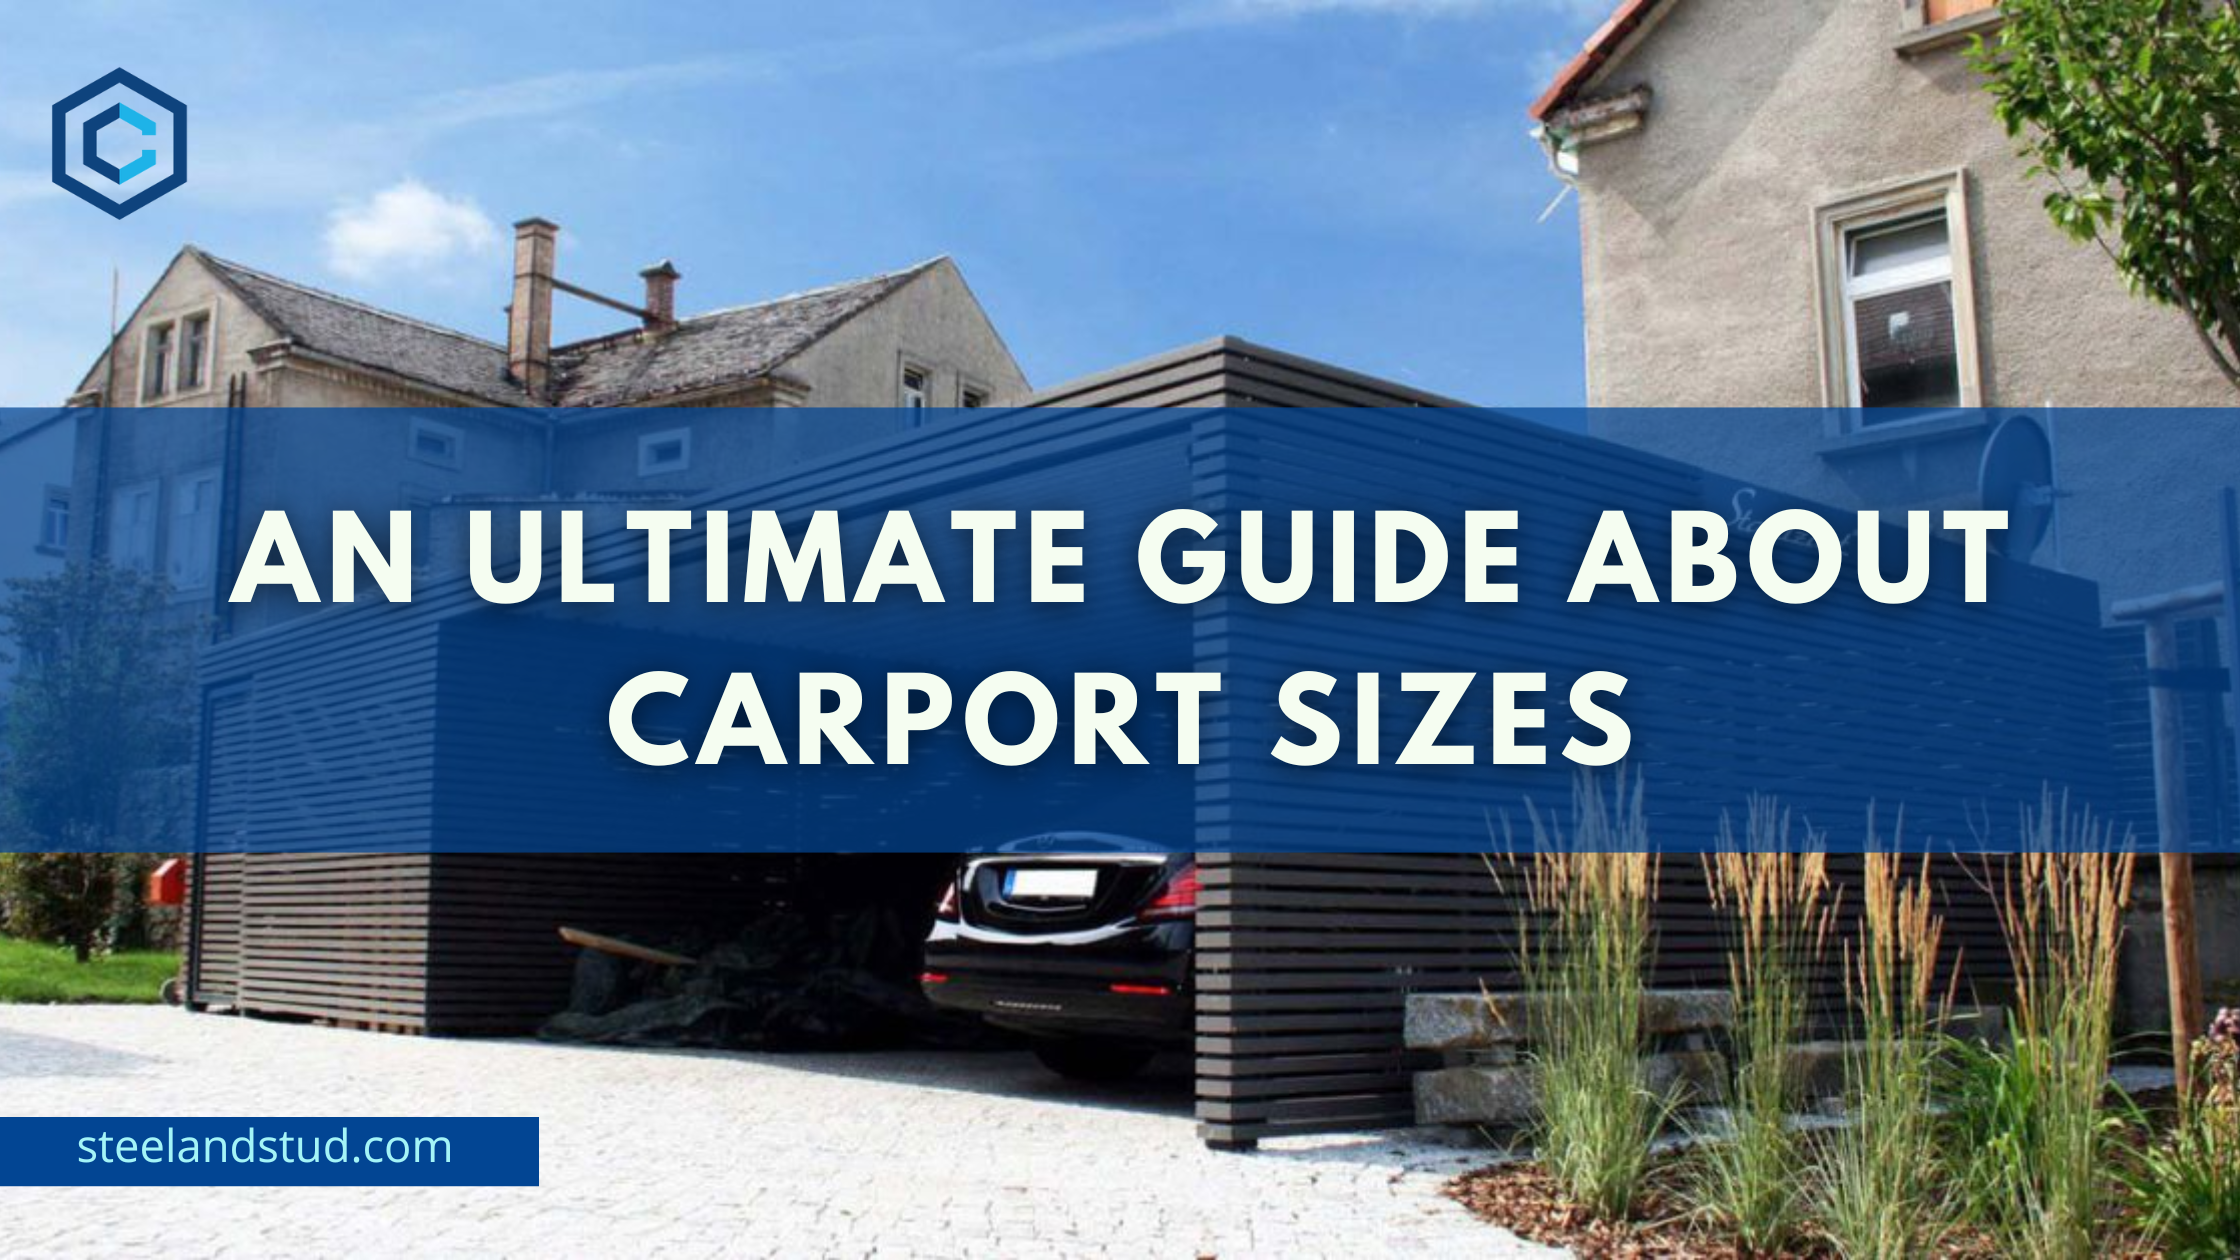 An Ultimate Guide About Carport Sizes